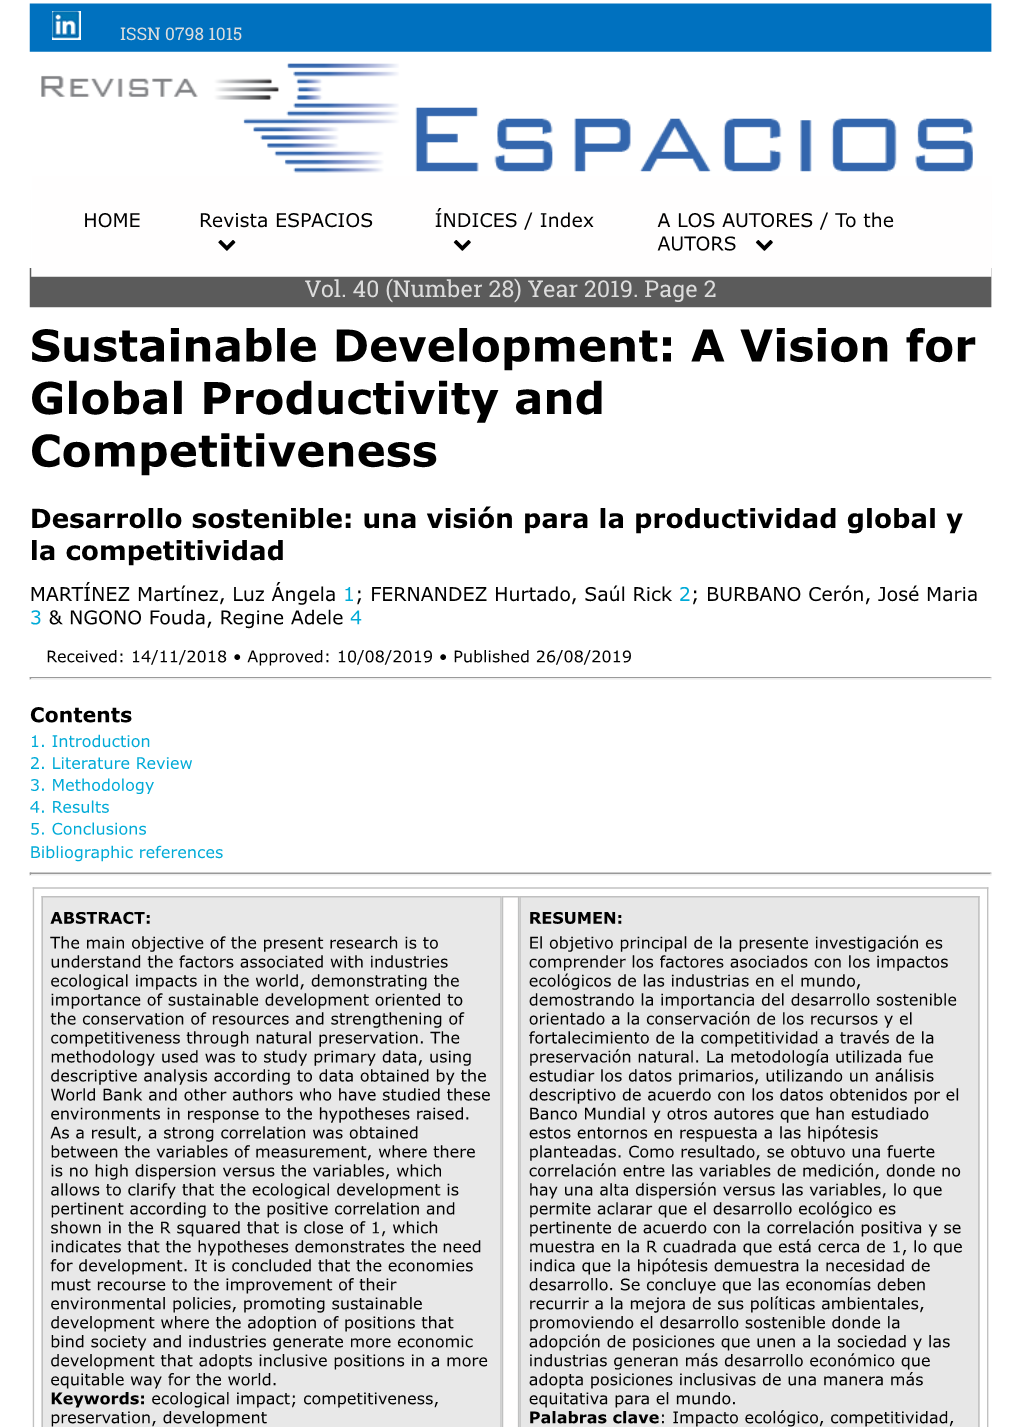 Sustainable Development: a Vision for Global Productivity and Competitiveness